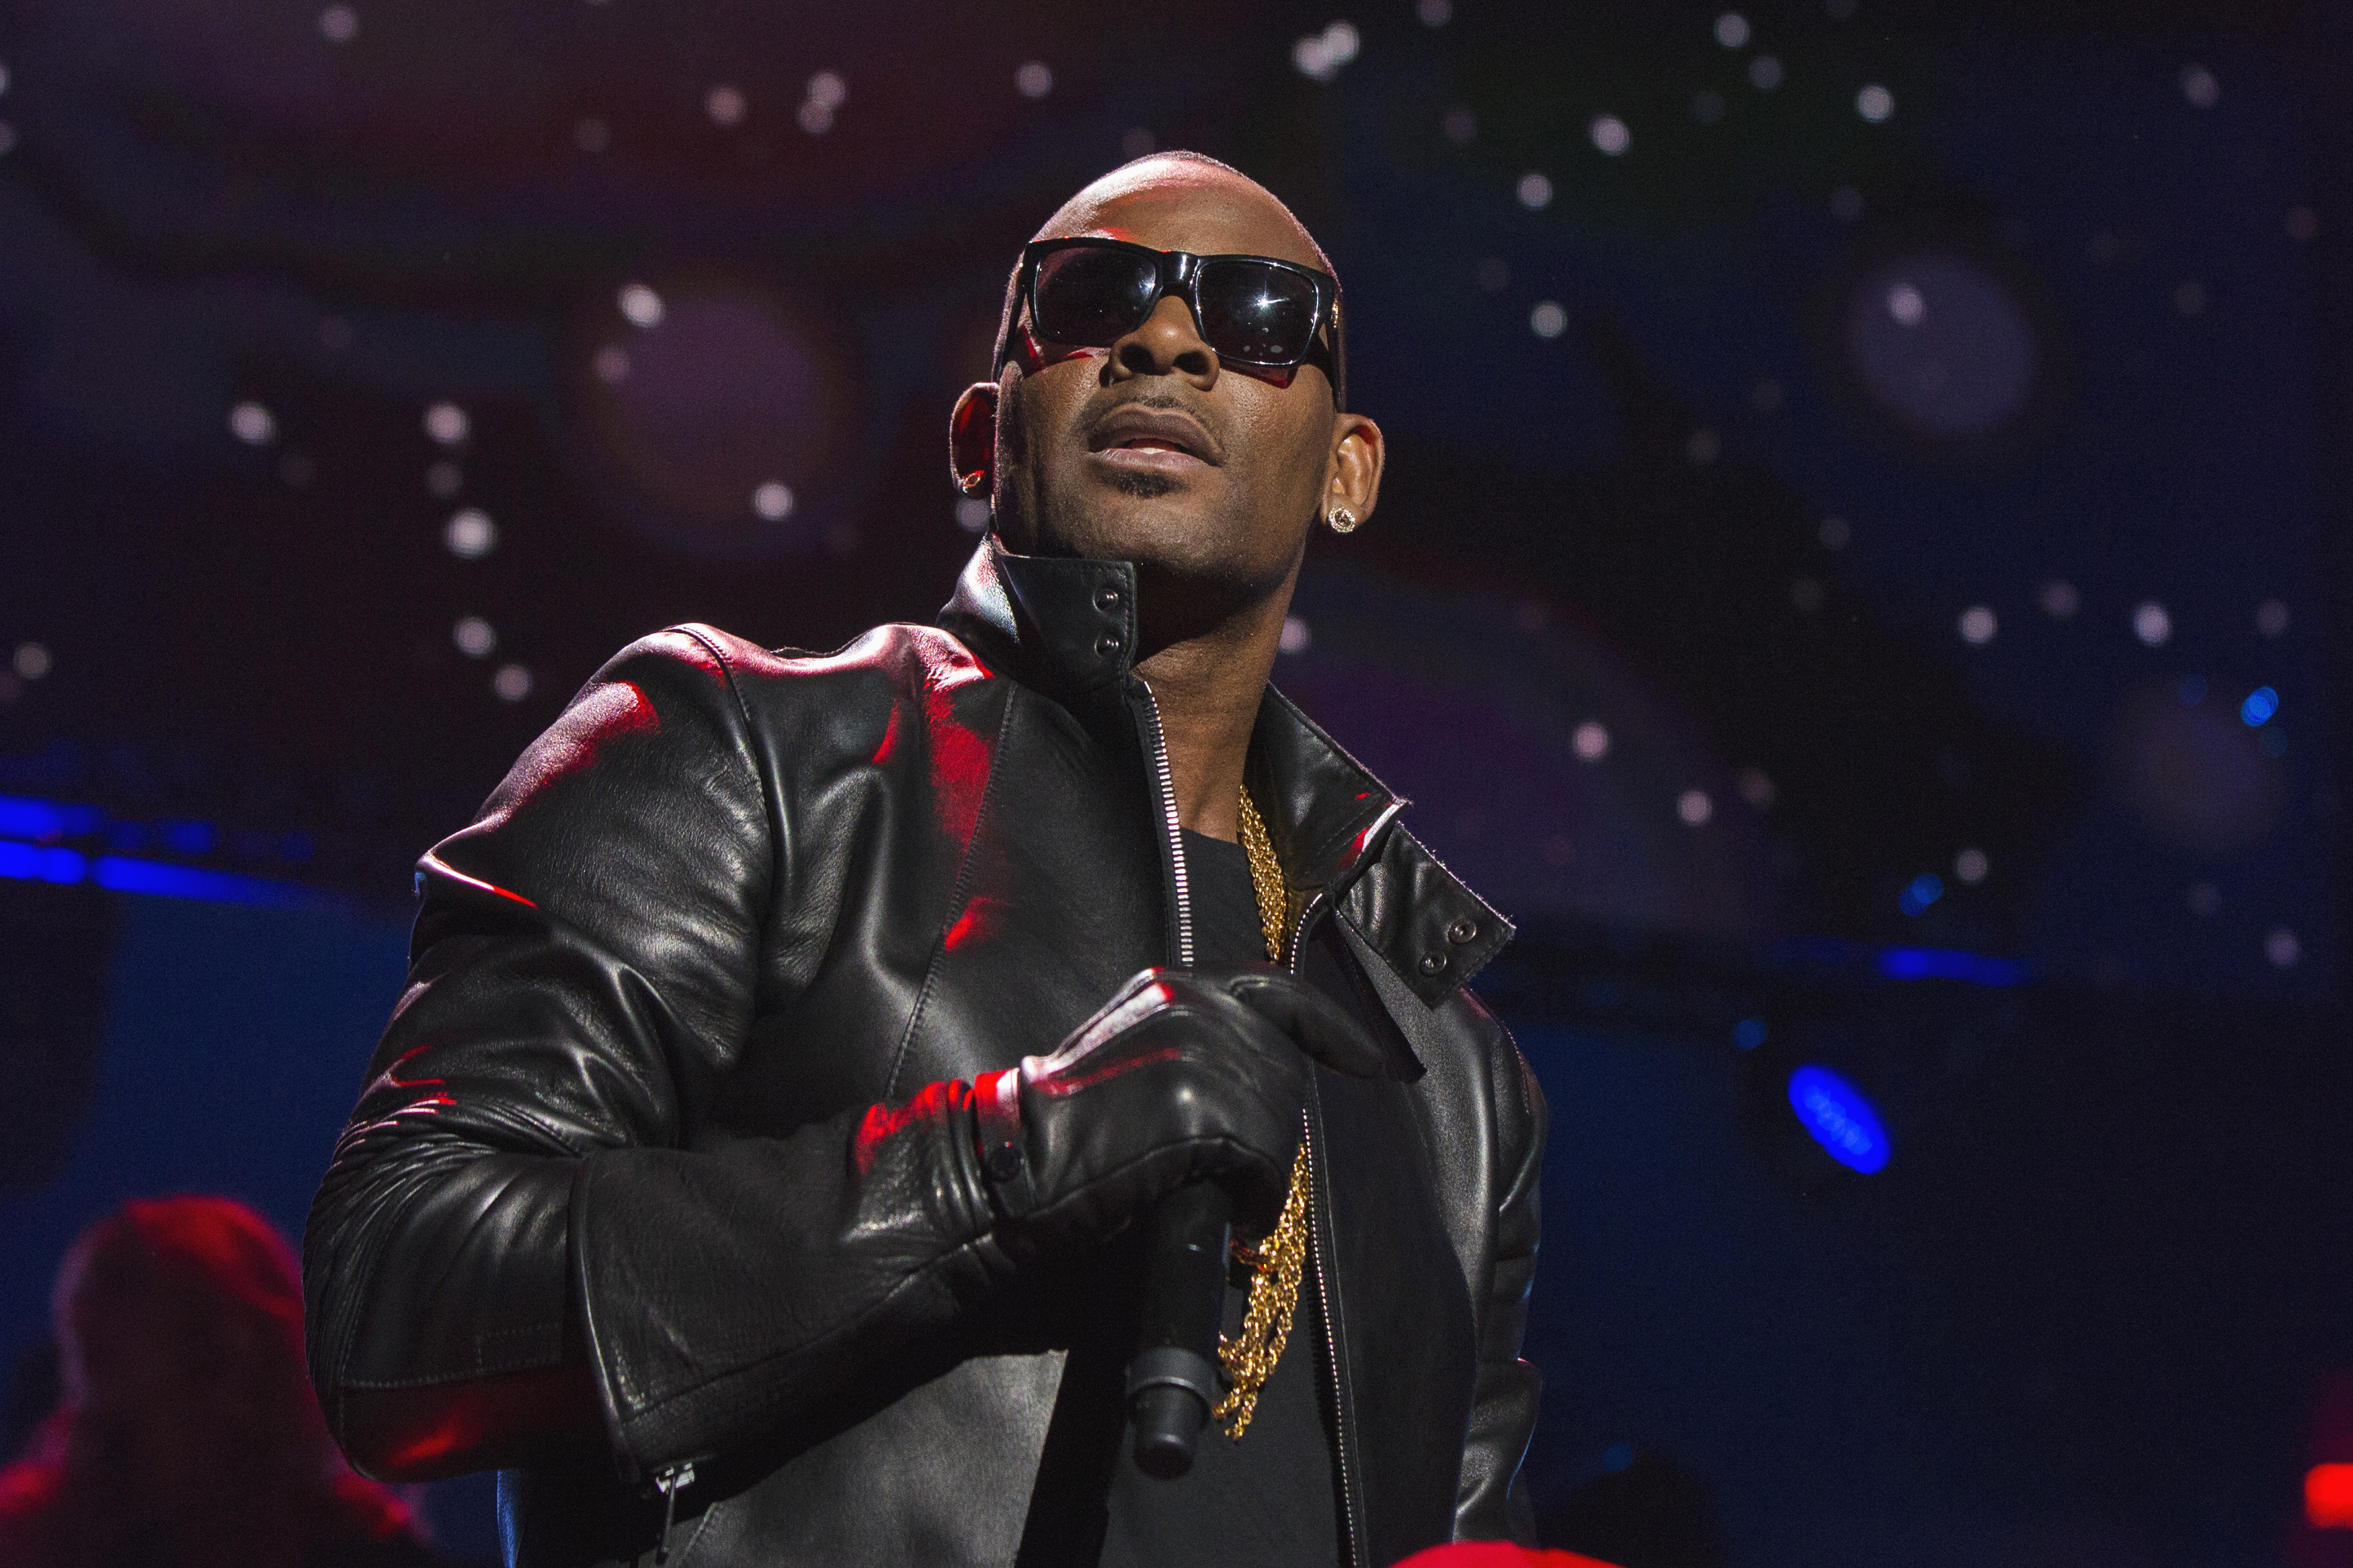 R Kelly performs during 2013 Z100 Jingle Ball in New York